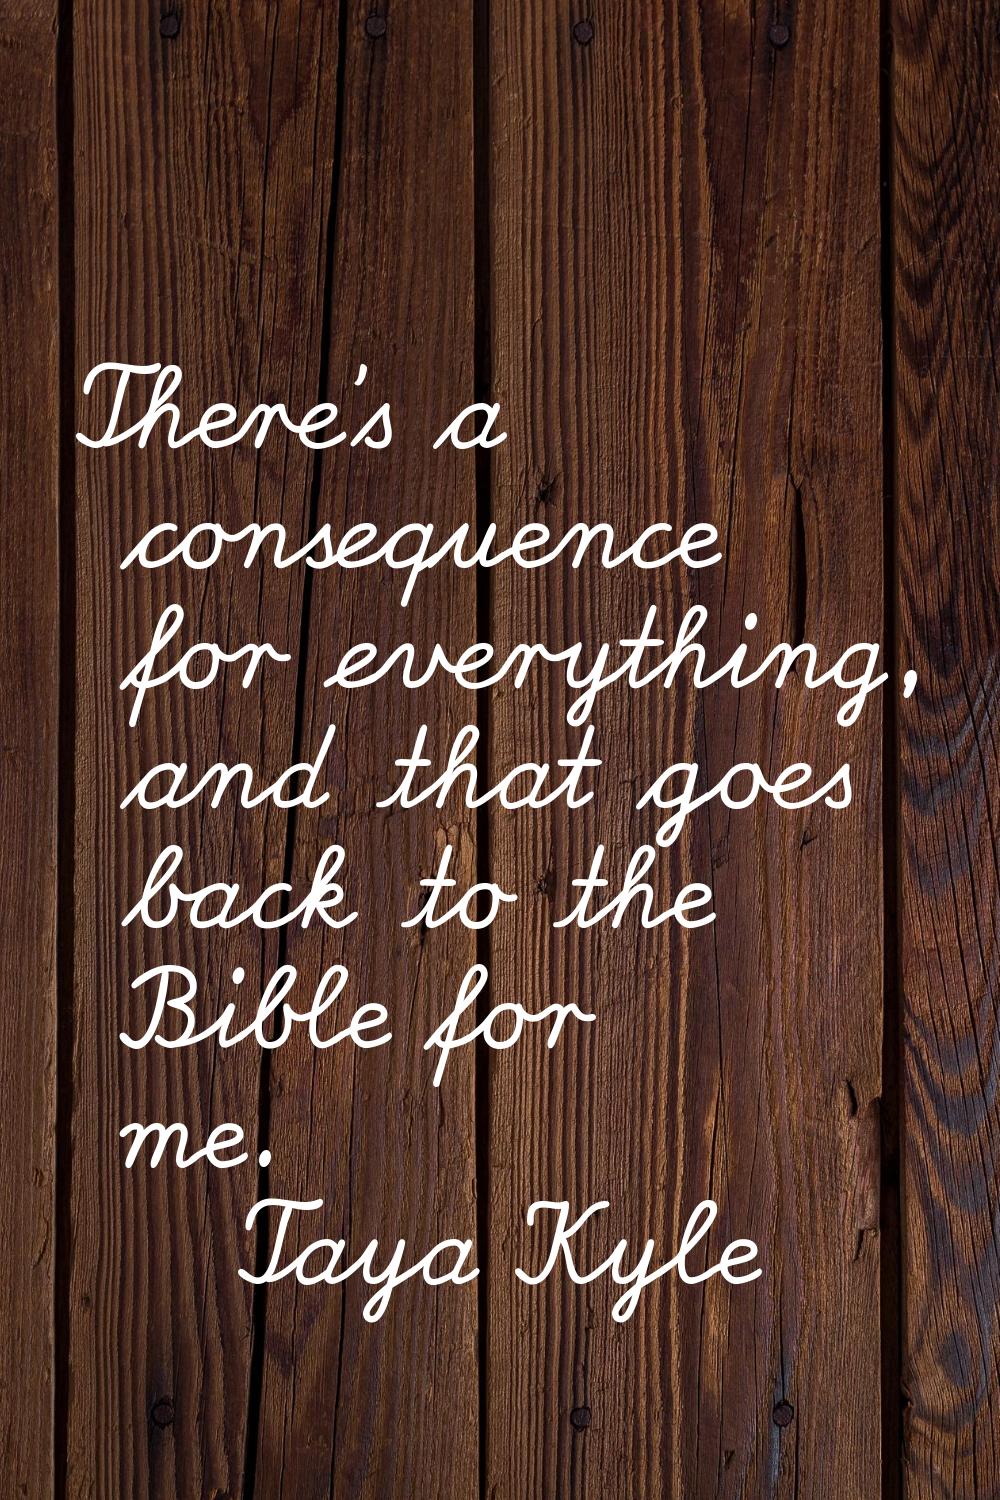 There's a consequence for everything, and that goes back to the Bible for me.